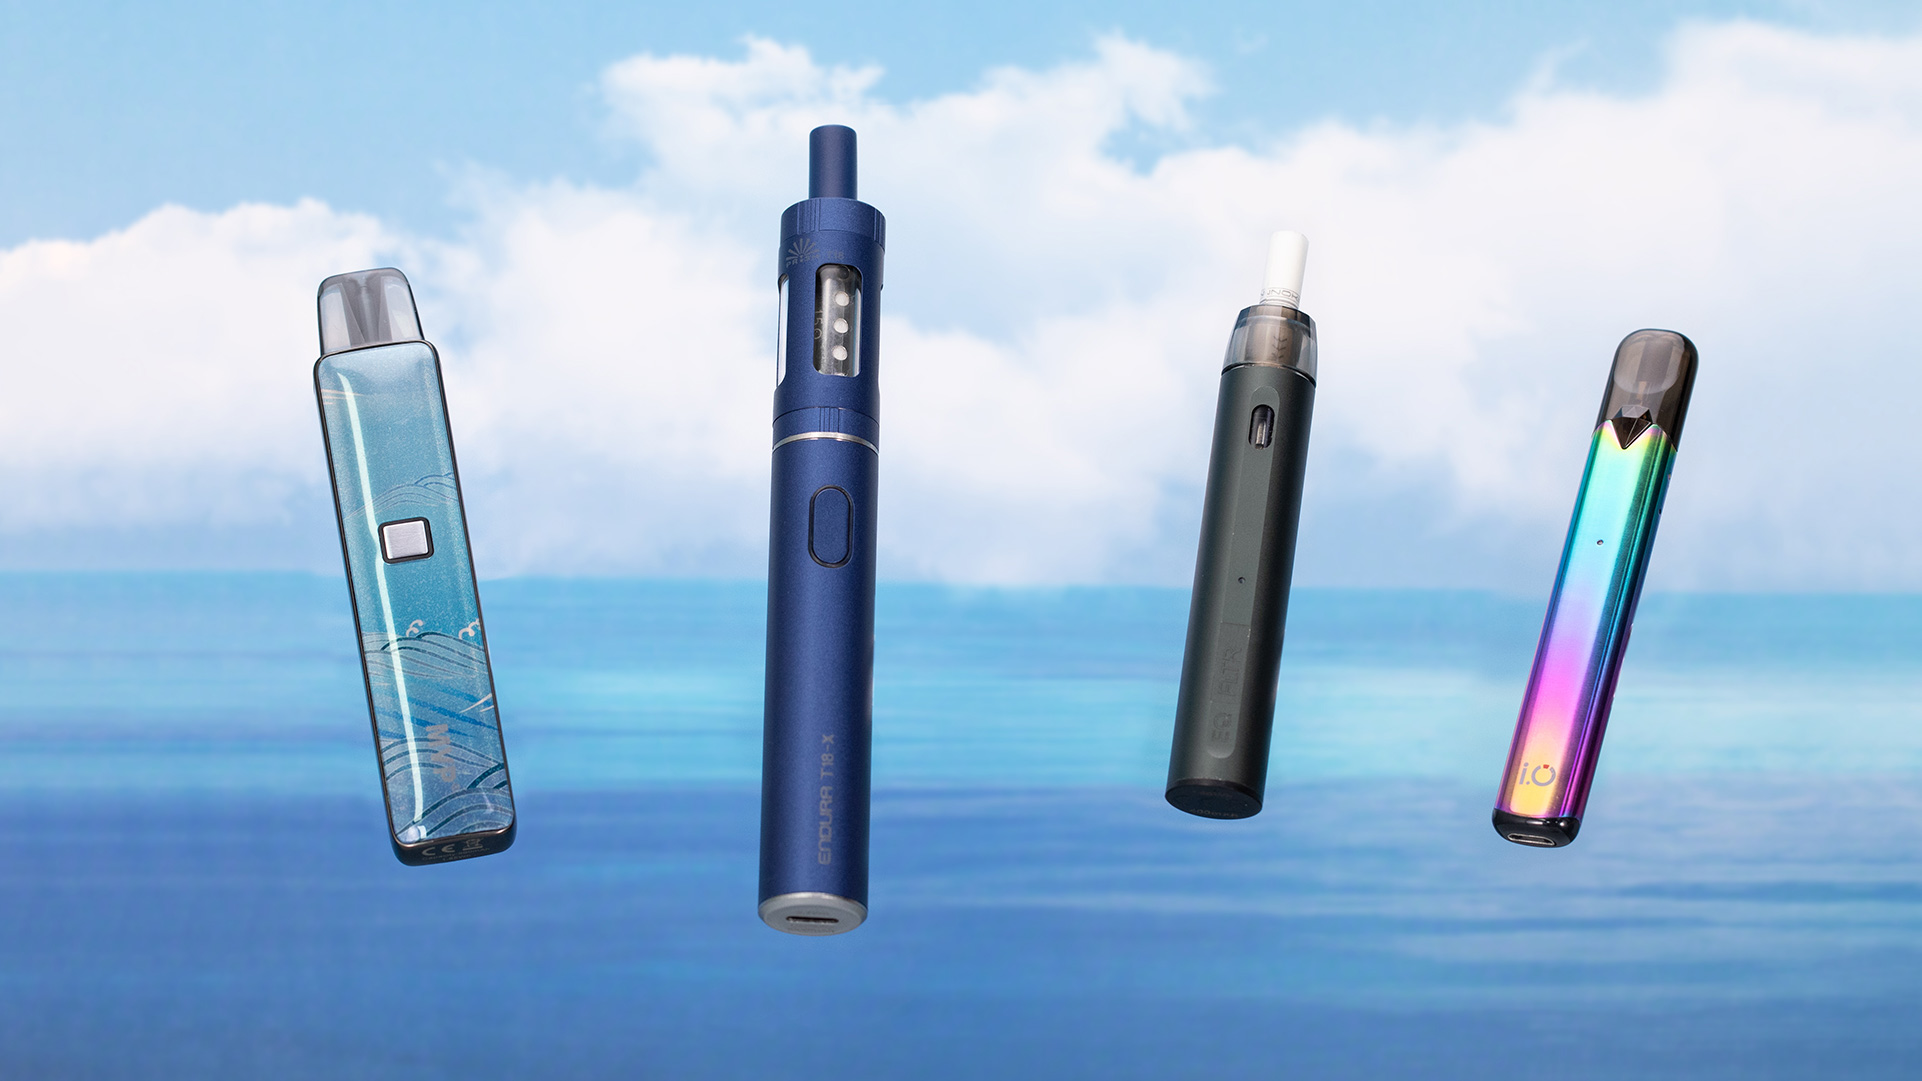 The Beginner's Guide To Dab Pens